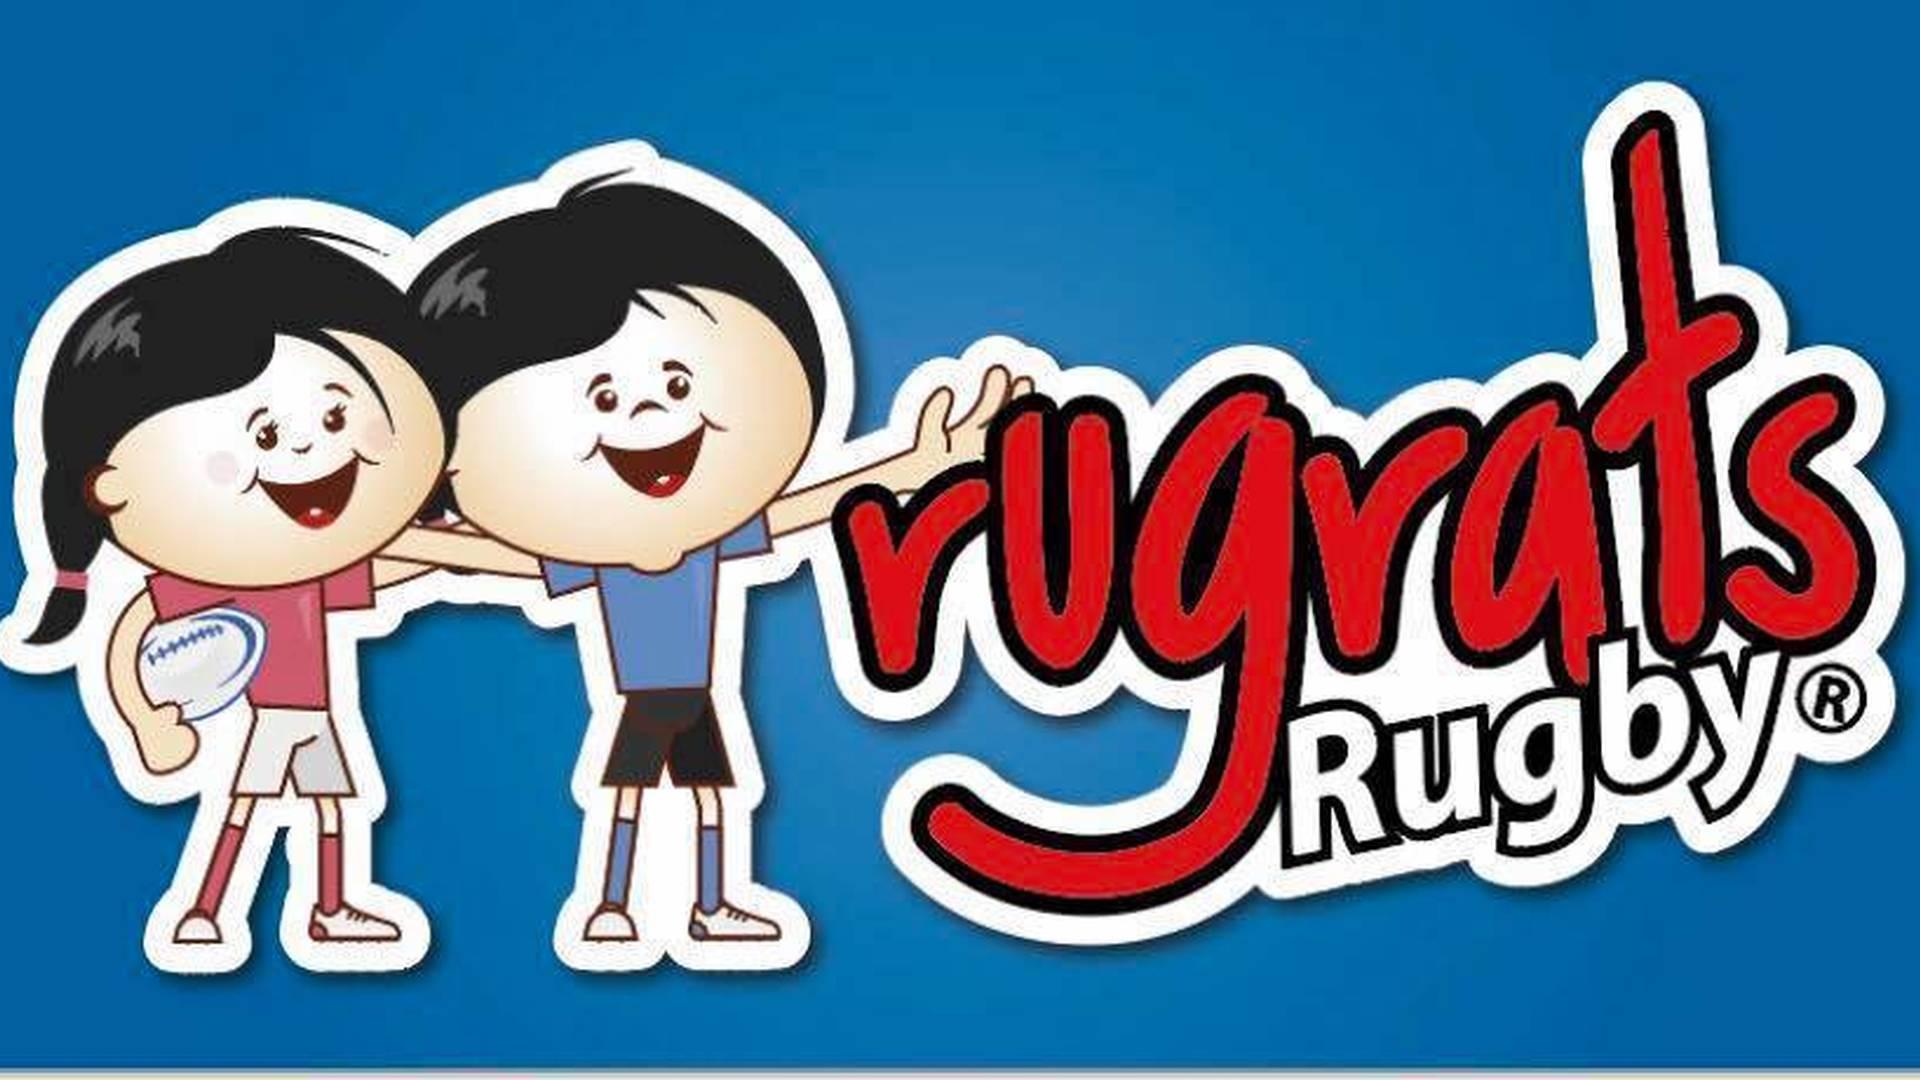 Rugrats Rugby - Leeds photo